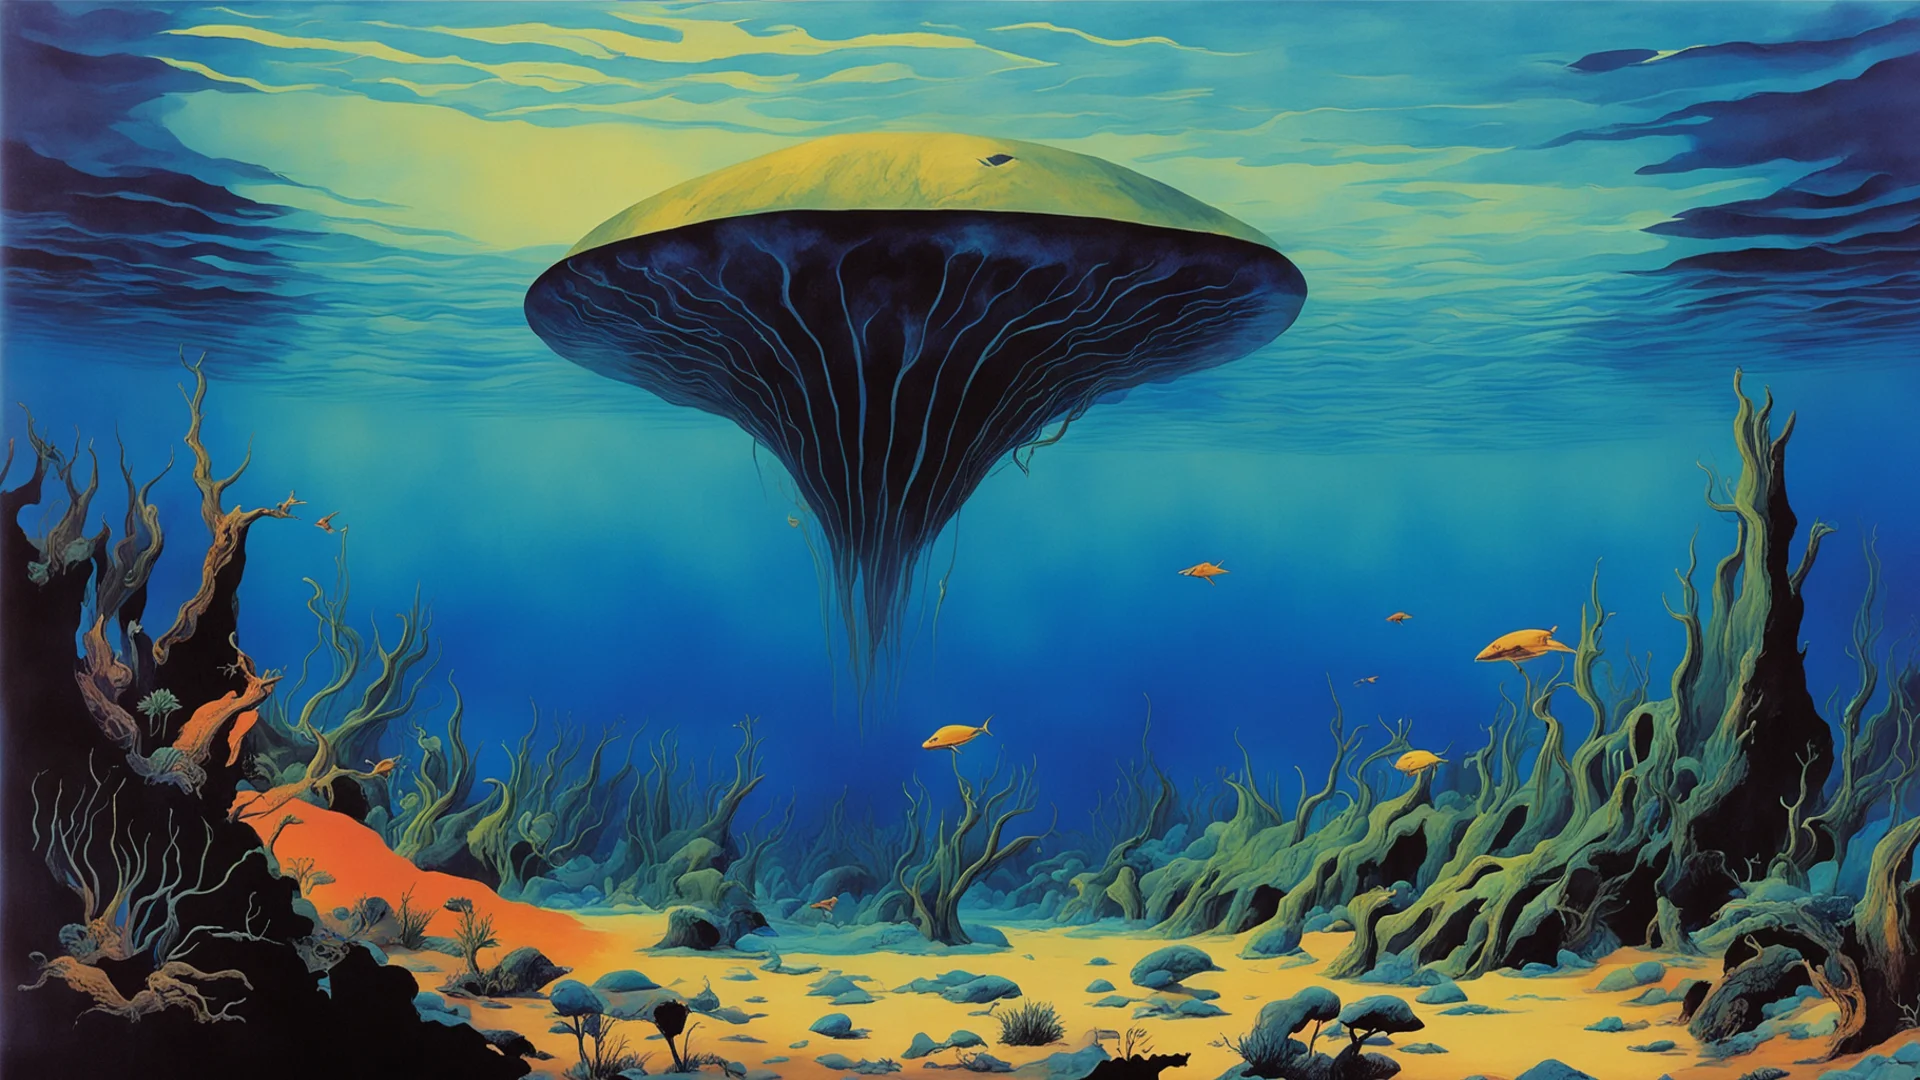 roger dean underwater scene like yes album cover amazing awesome portrait 2 wide